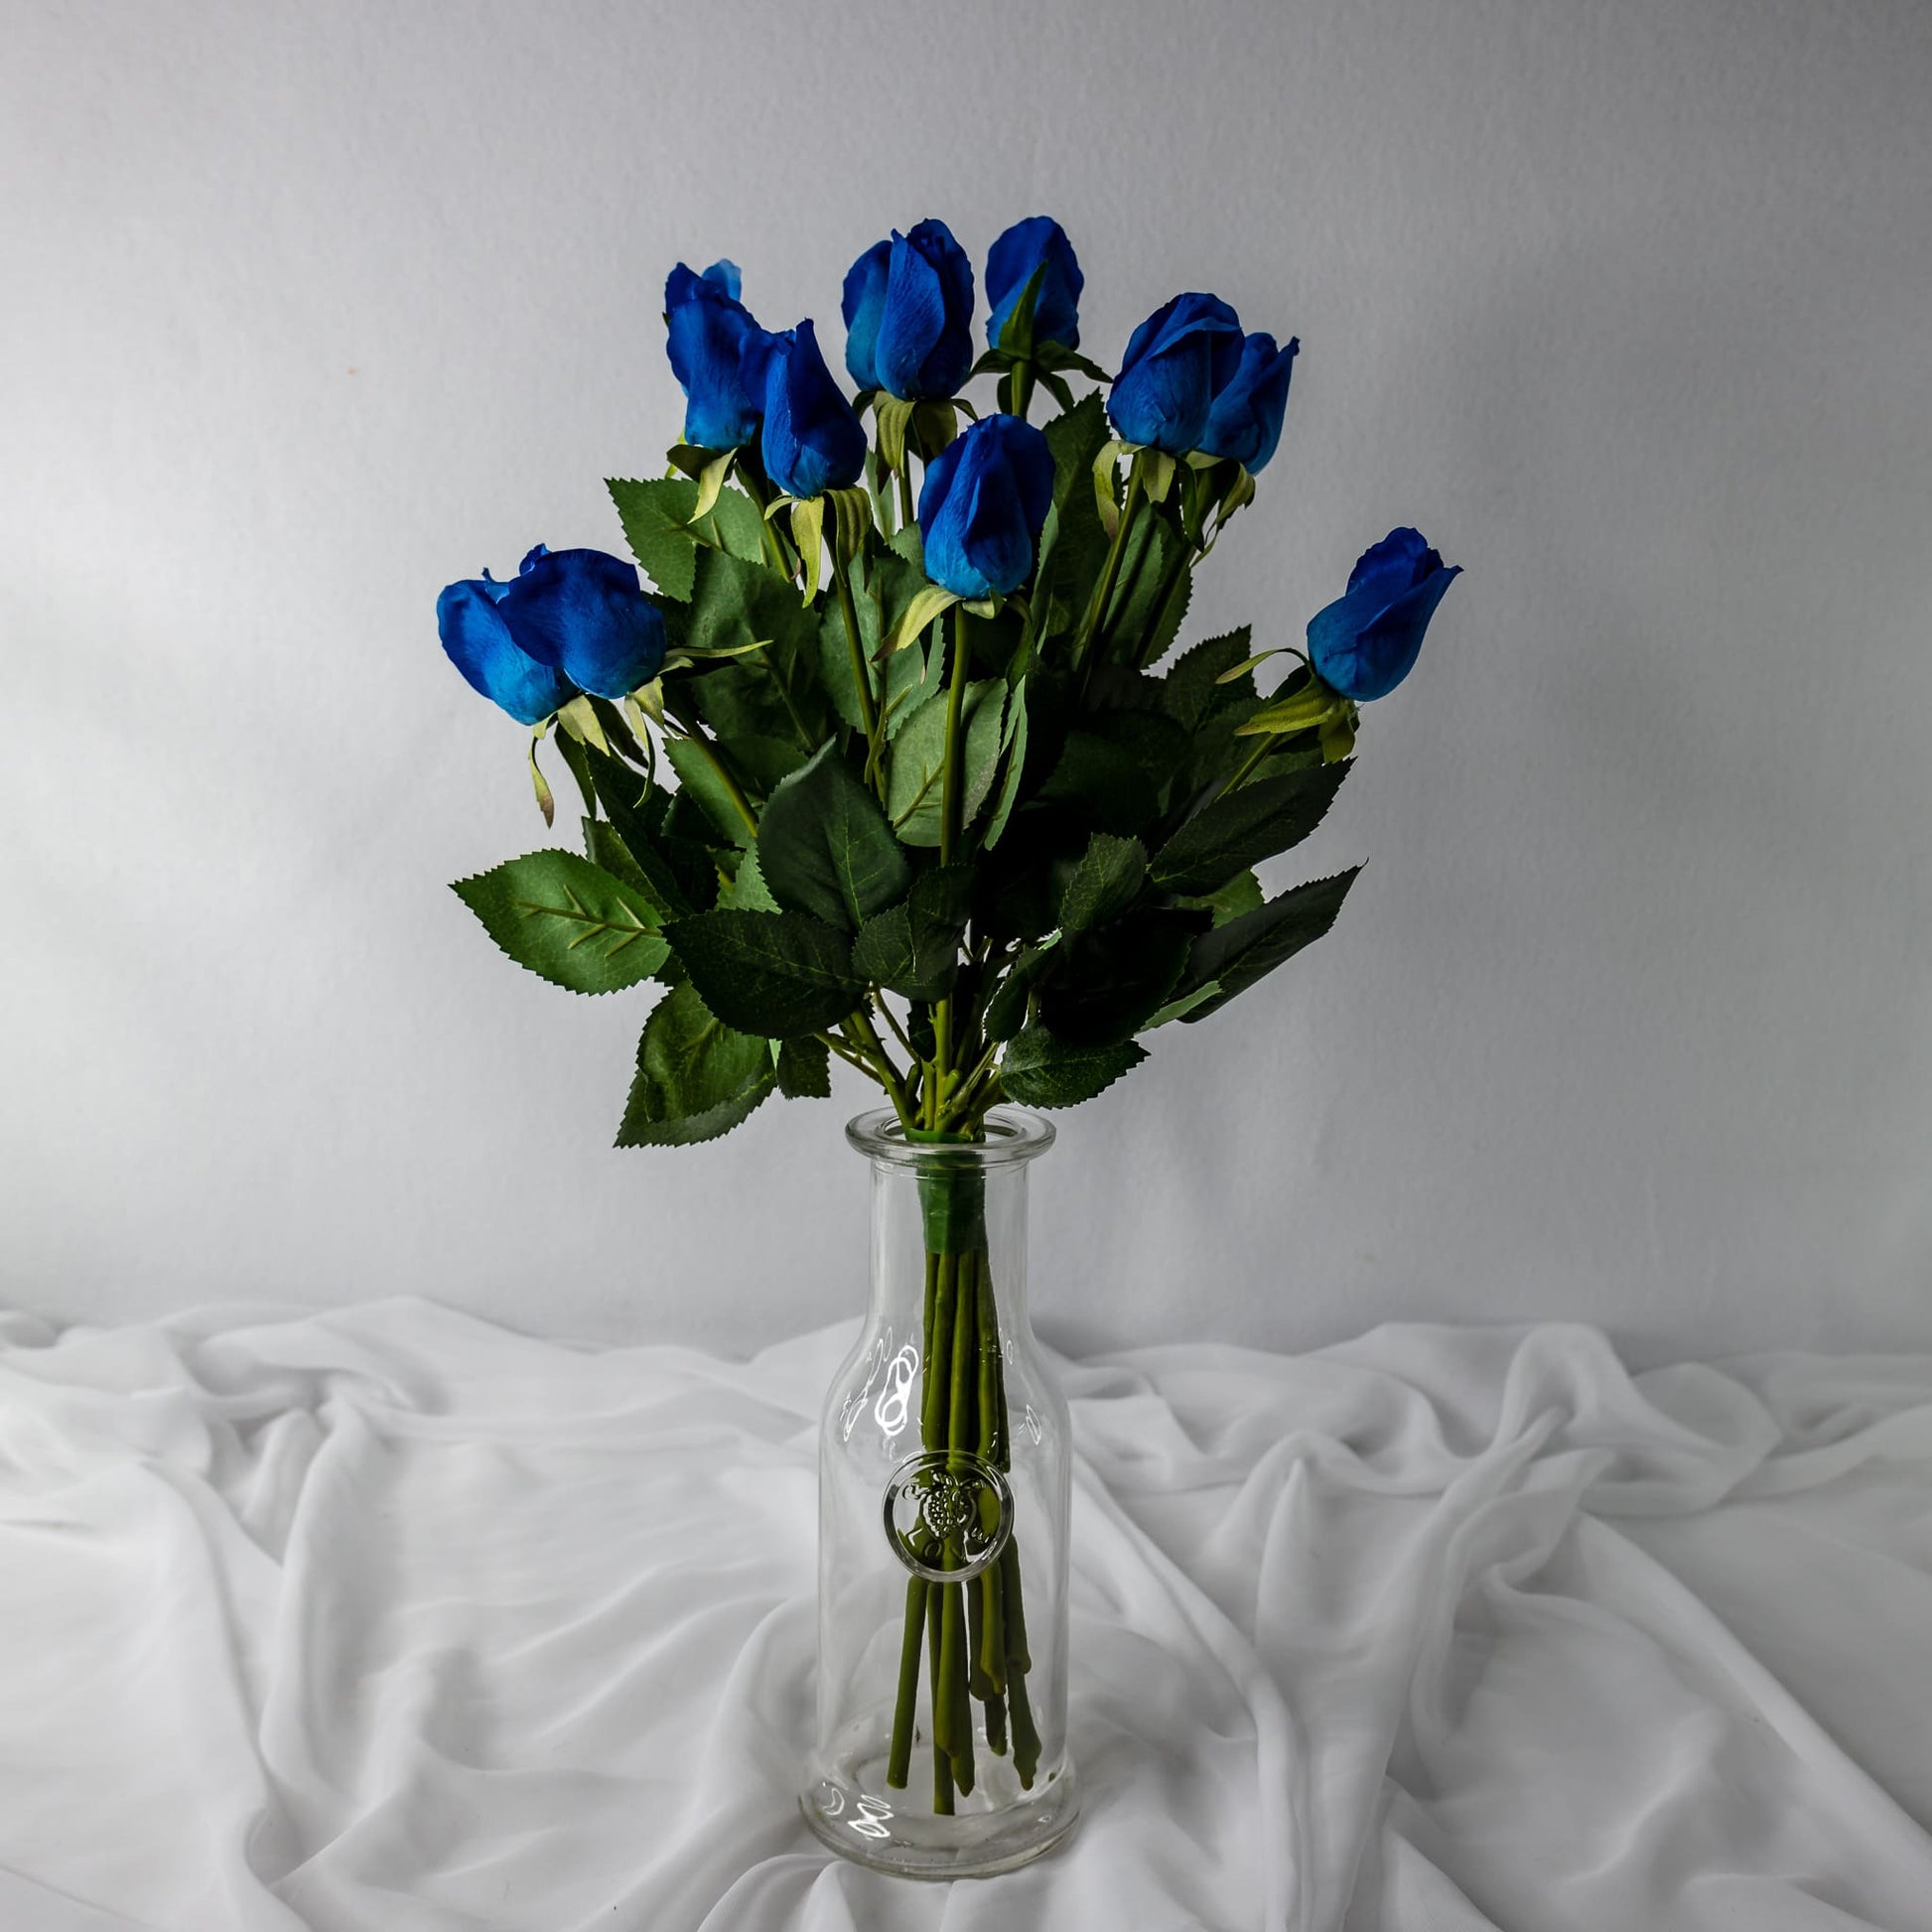 artificial deep blue rose buds placed in clear glass vase